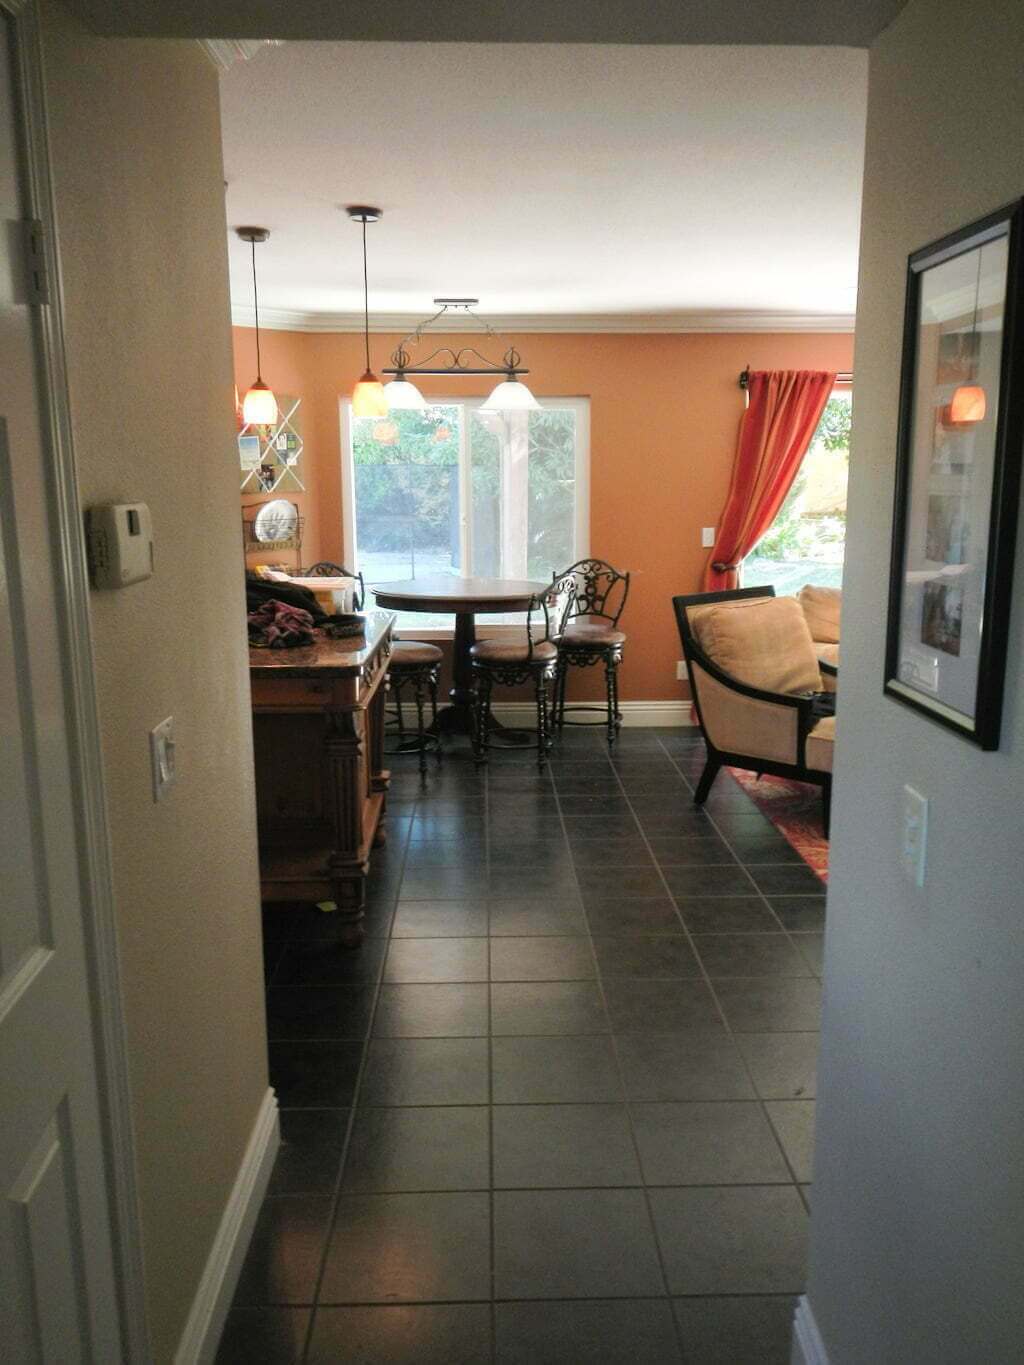 view towards kitchen and dining nook from hallway, black tiled floors